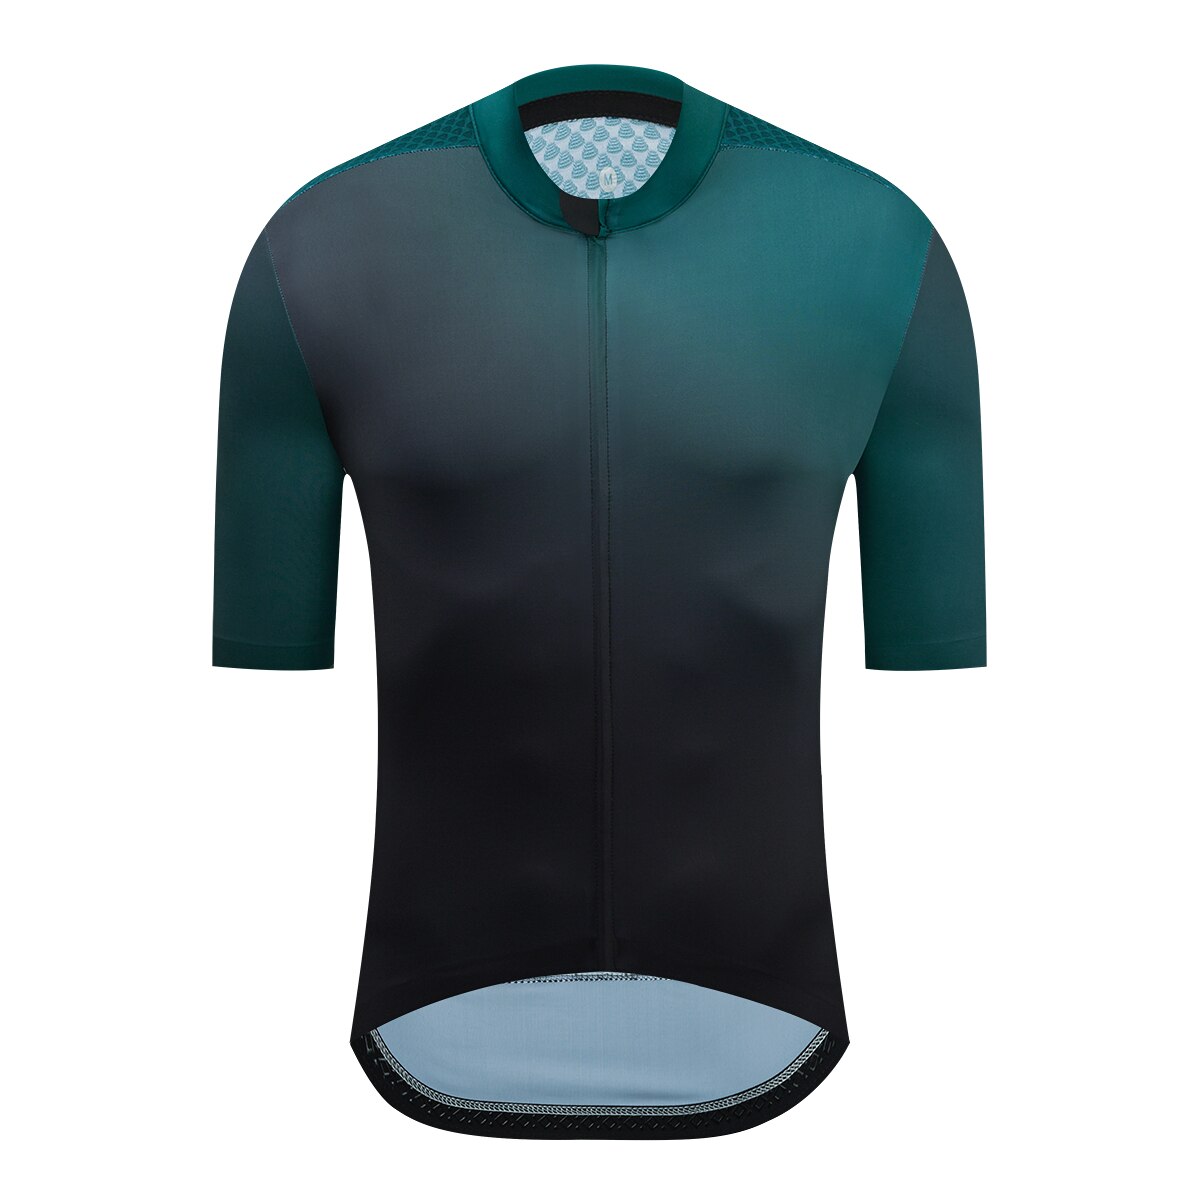 YKYW Men's PRO Team Aero Cycling Jersey Short Sleeve Breathable 5 Colors